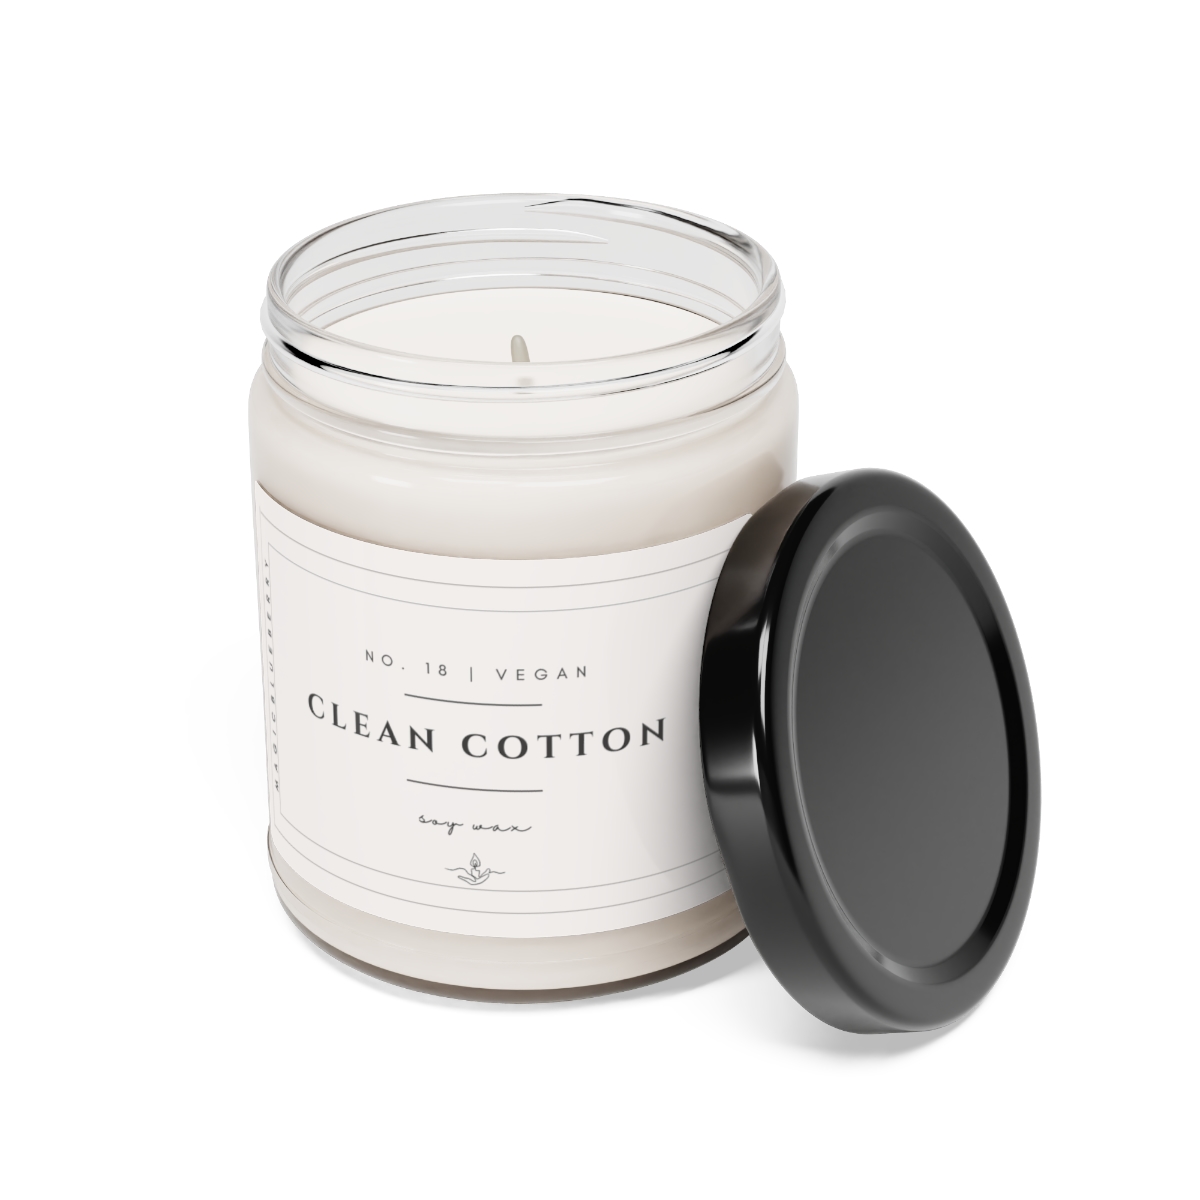 Clean Cotton Scented Vegan Soy Wax Candle Clear Jar Candle, Spell Candle, Sassy Candle Vegan Candle Cotton Wick Candle Home Deco product thumbnail image